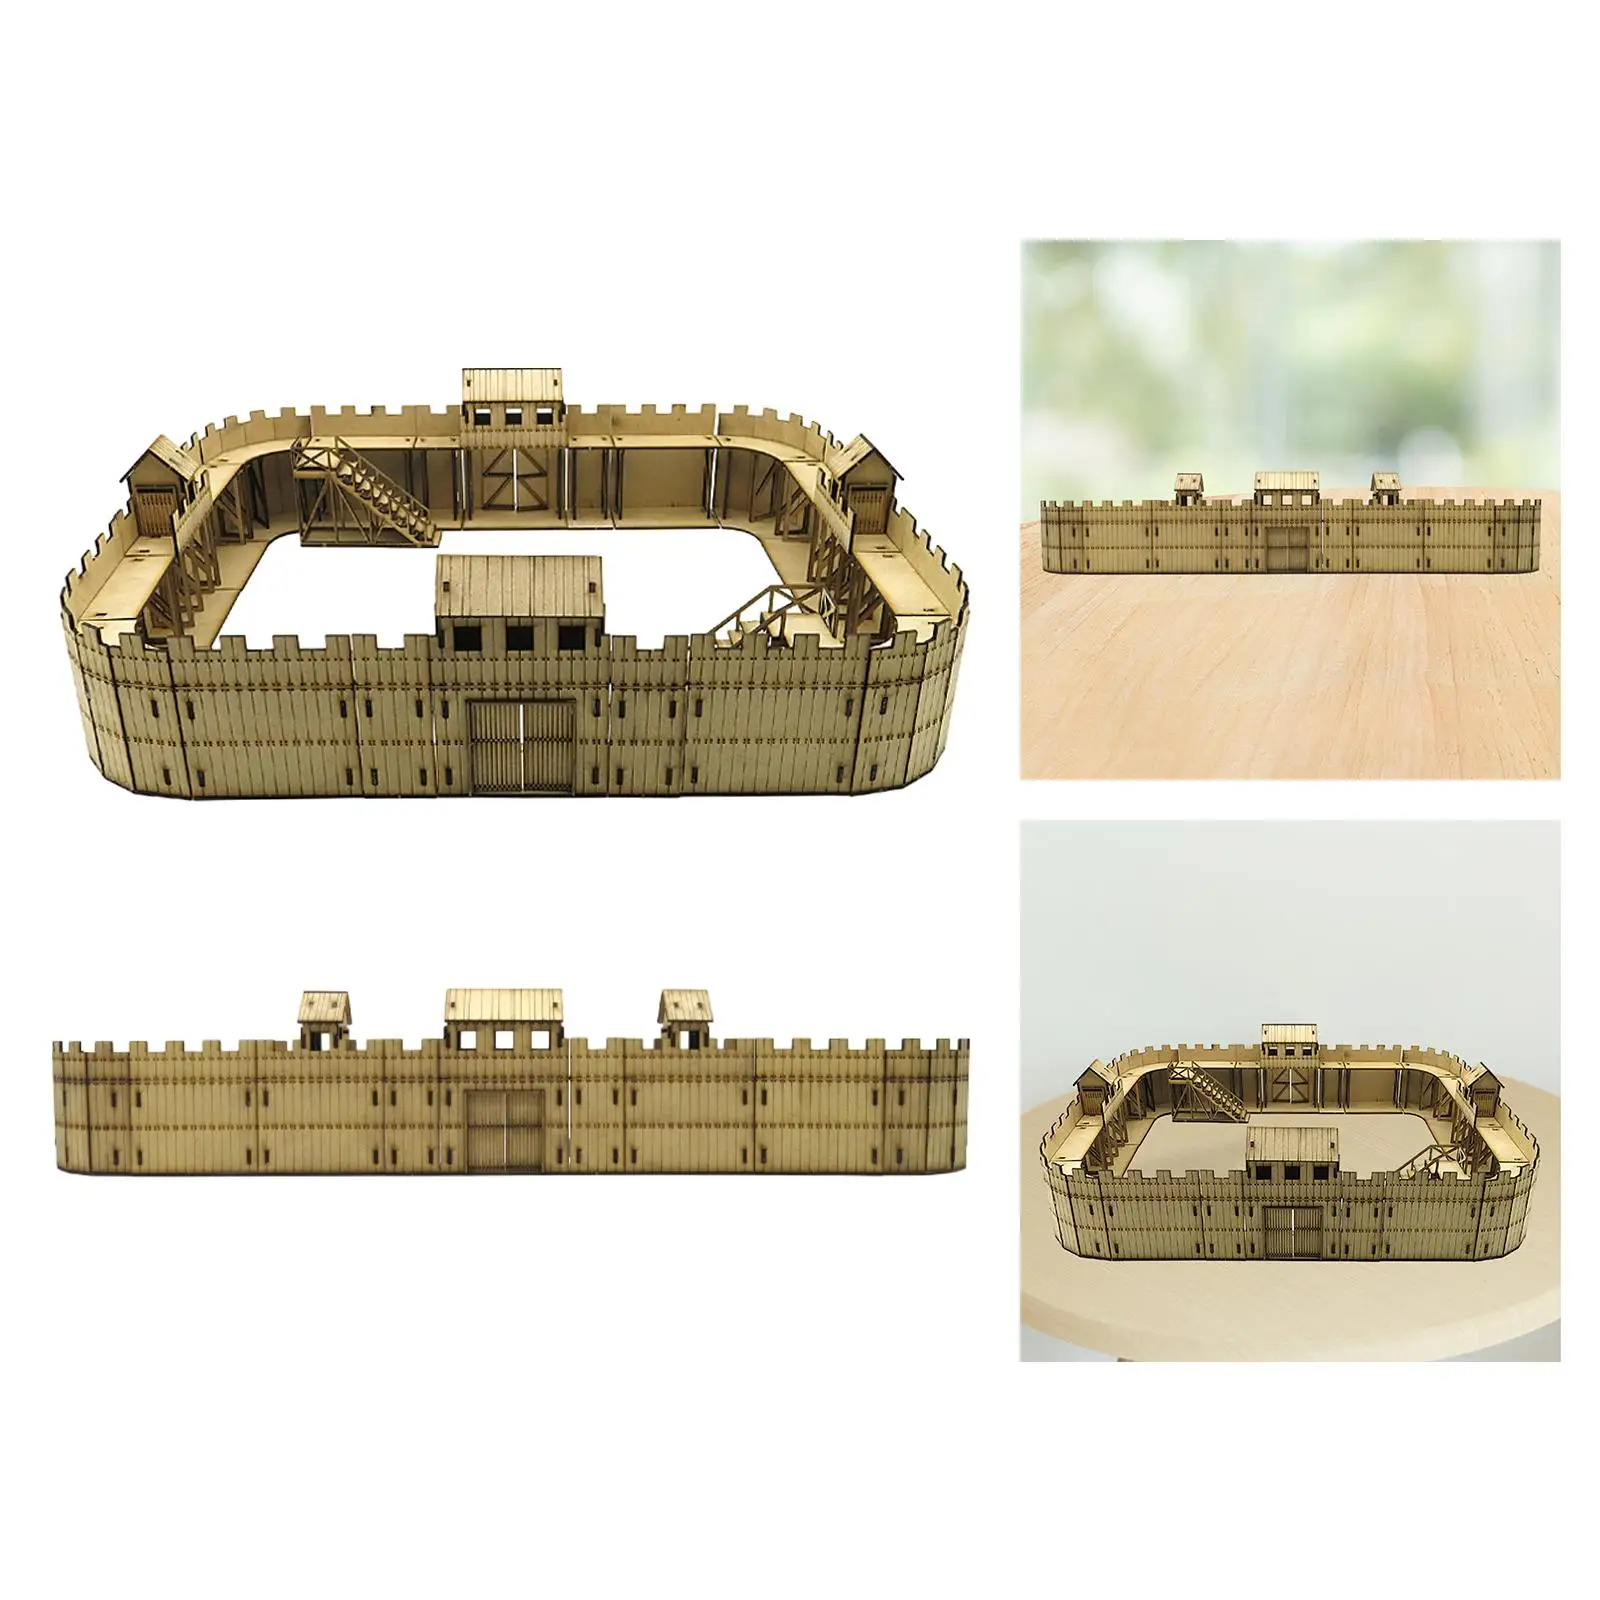 1/72 Handmade Miniature 3D Puzzles Landscape Unassembly for Model Railway Accessory Diorama Sand Table Architecture Model